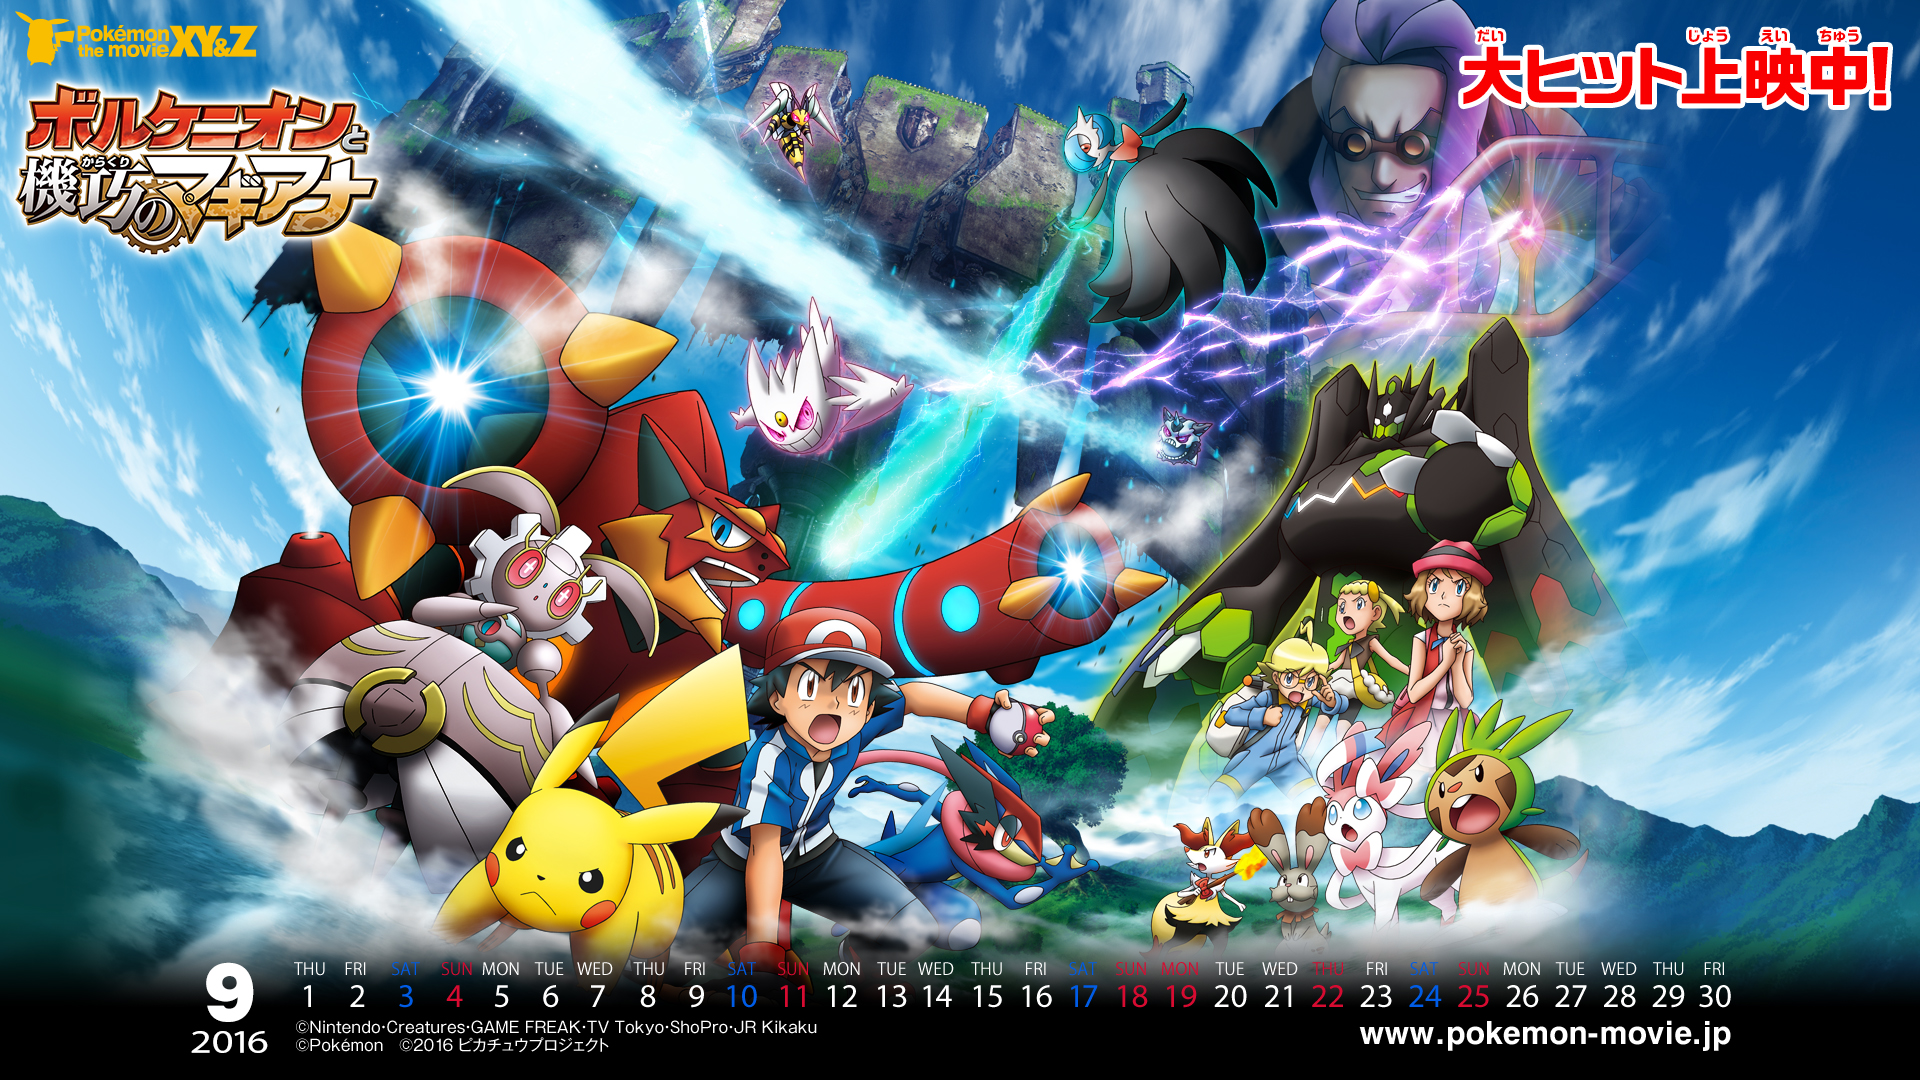 POKÉMON THE MOVIE XY&Z Info and High-Res Images